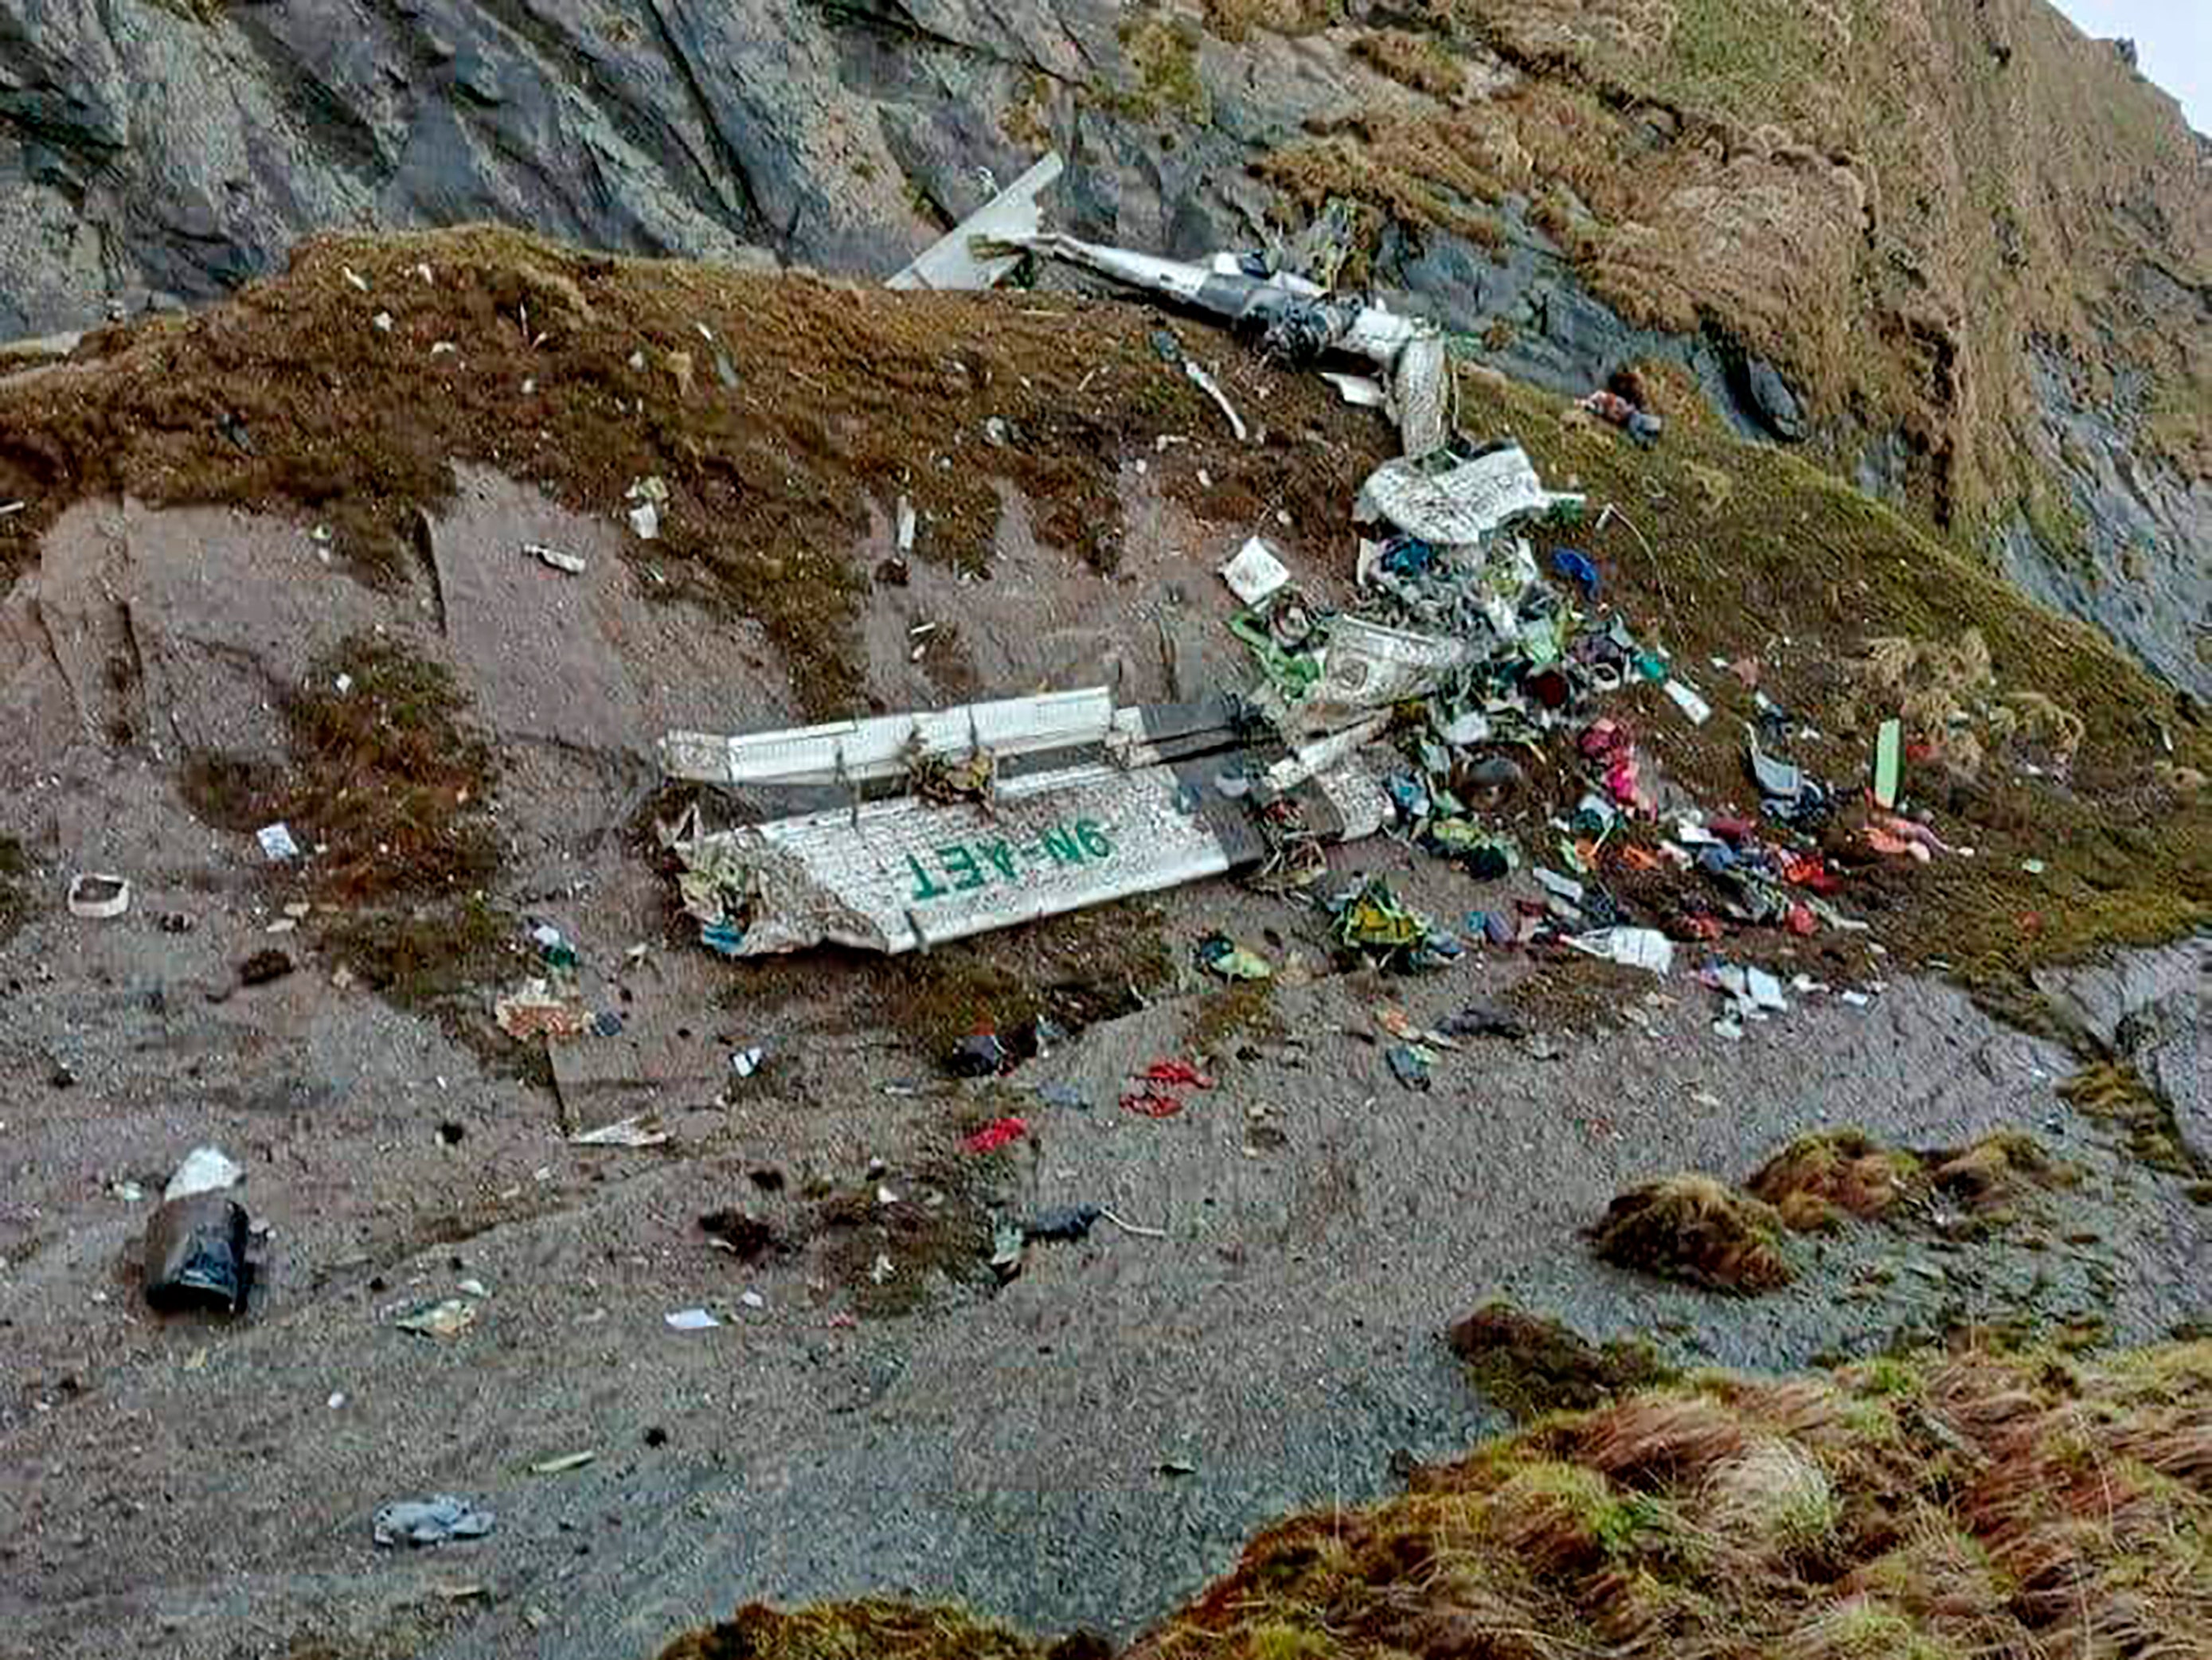 At least 14 dead after plane crashes in Nepal mountains